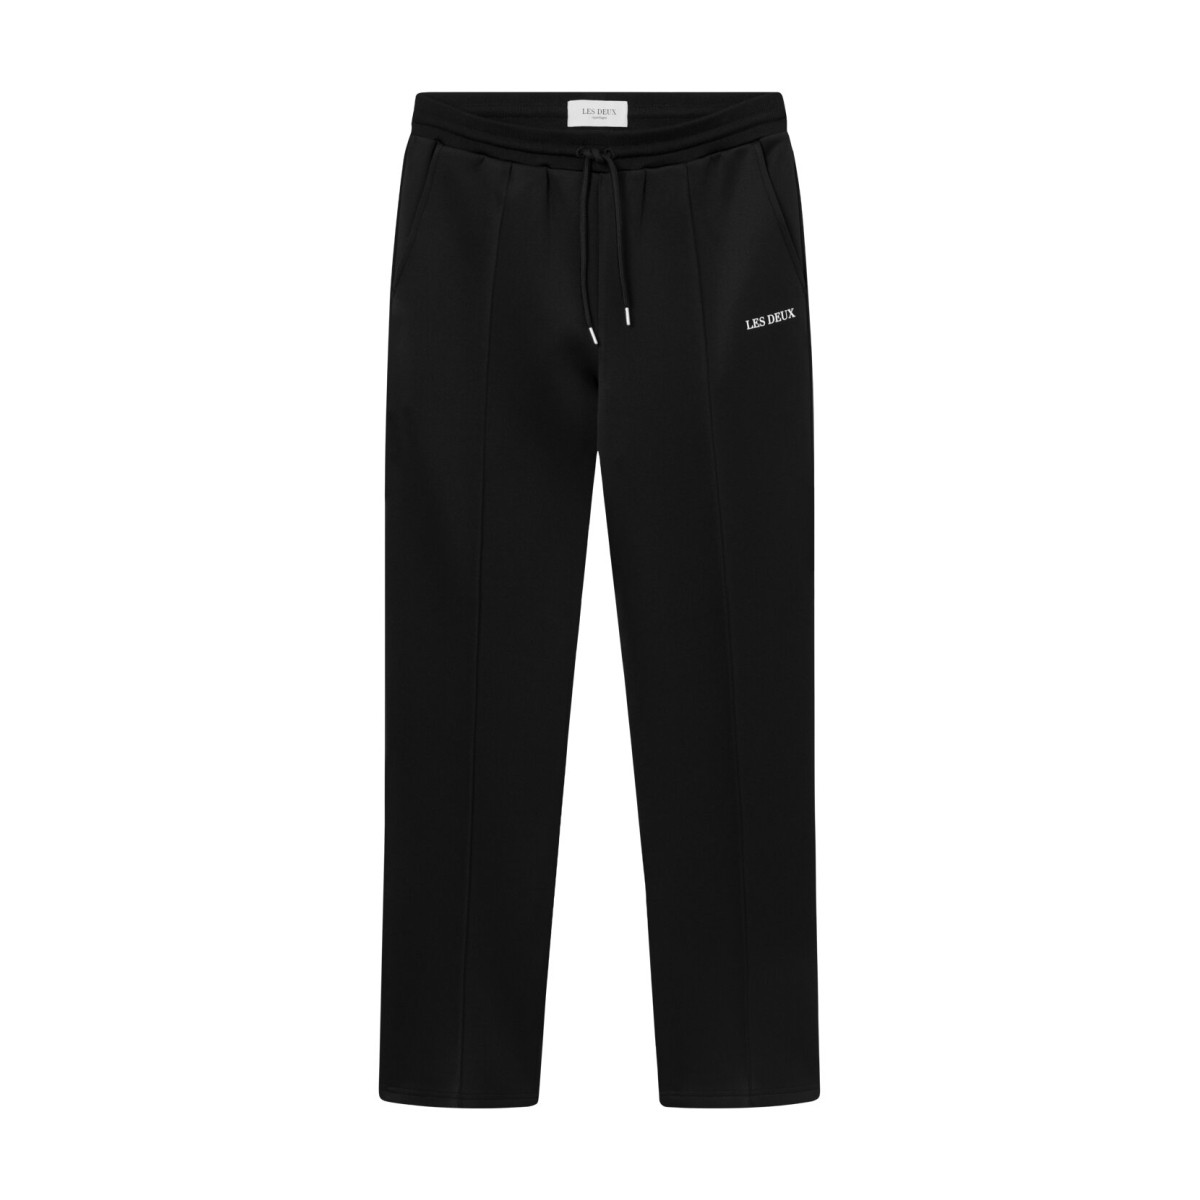 Ballier Casual Track Pants